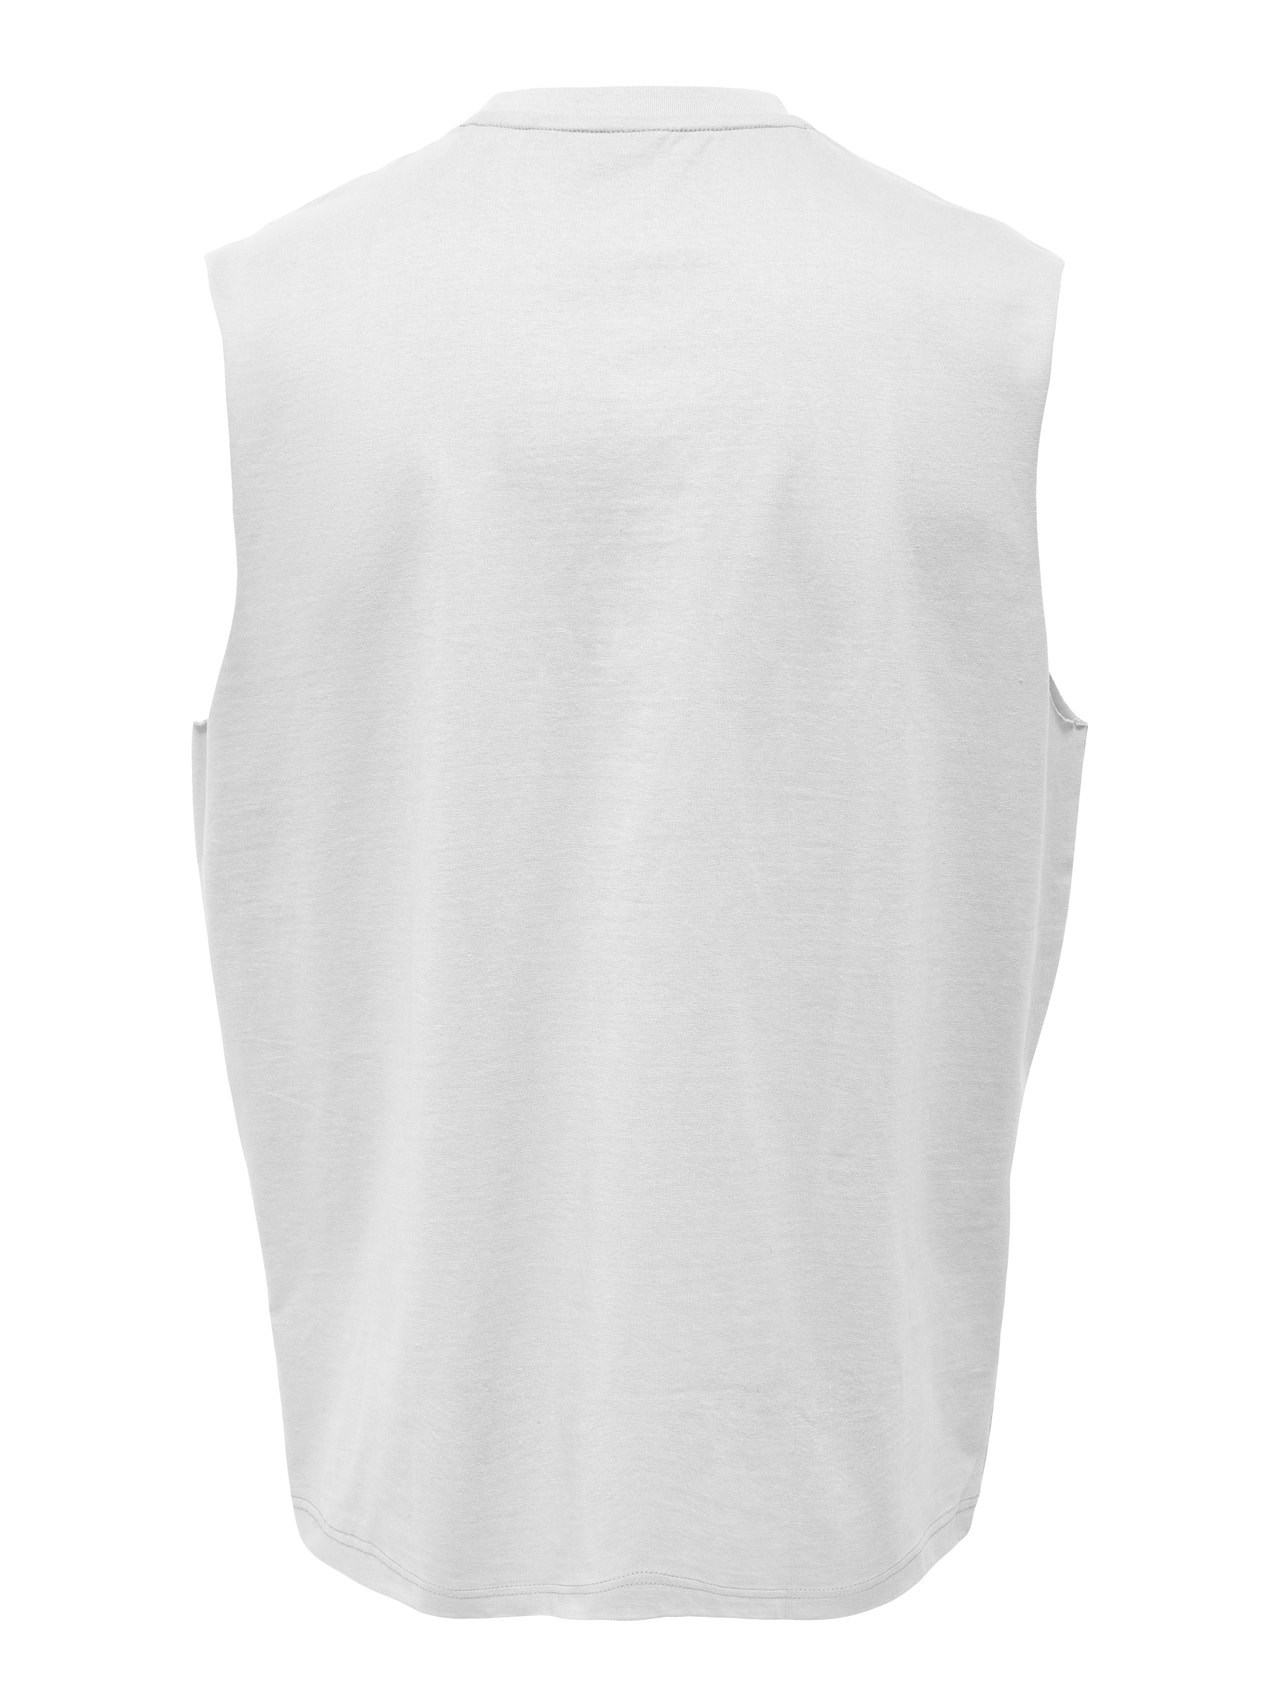 ONLY & SONS Relaxed Fit Round Neck T-Shirt -White - 22025300